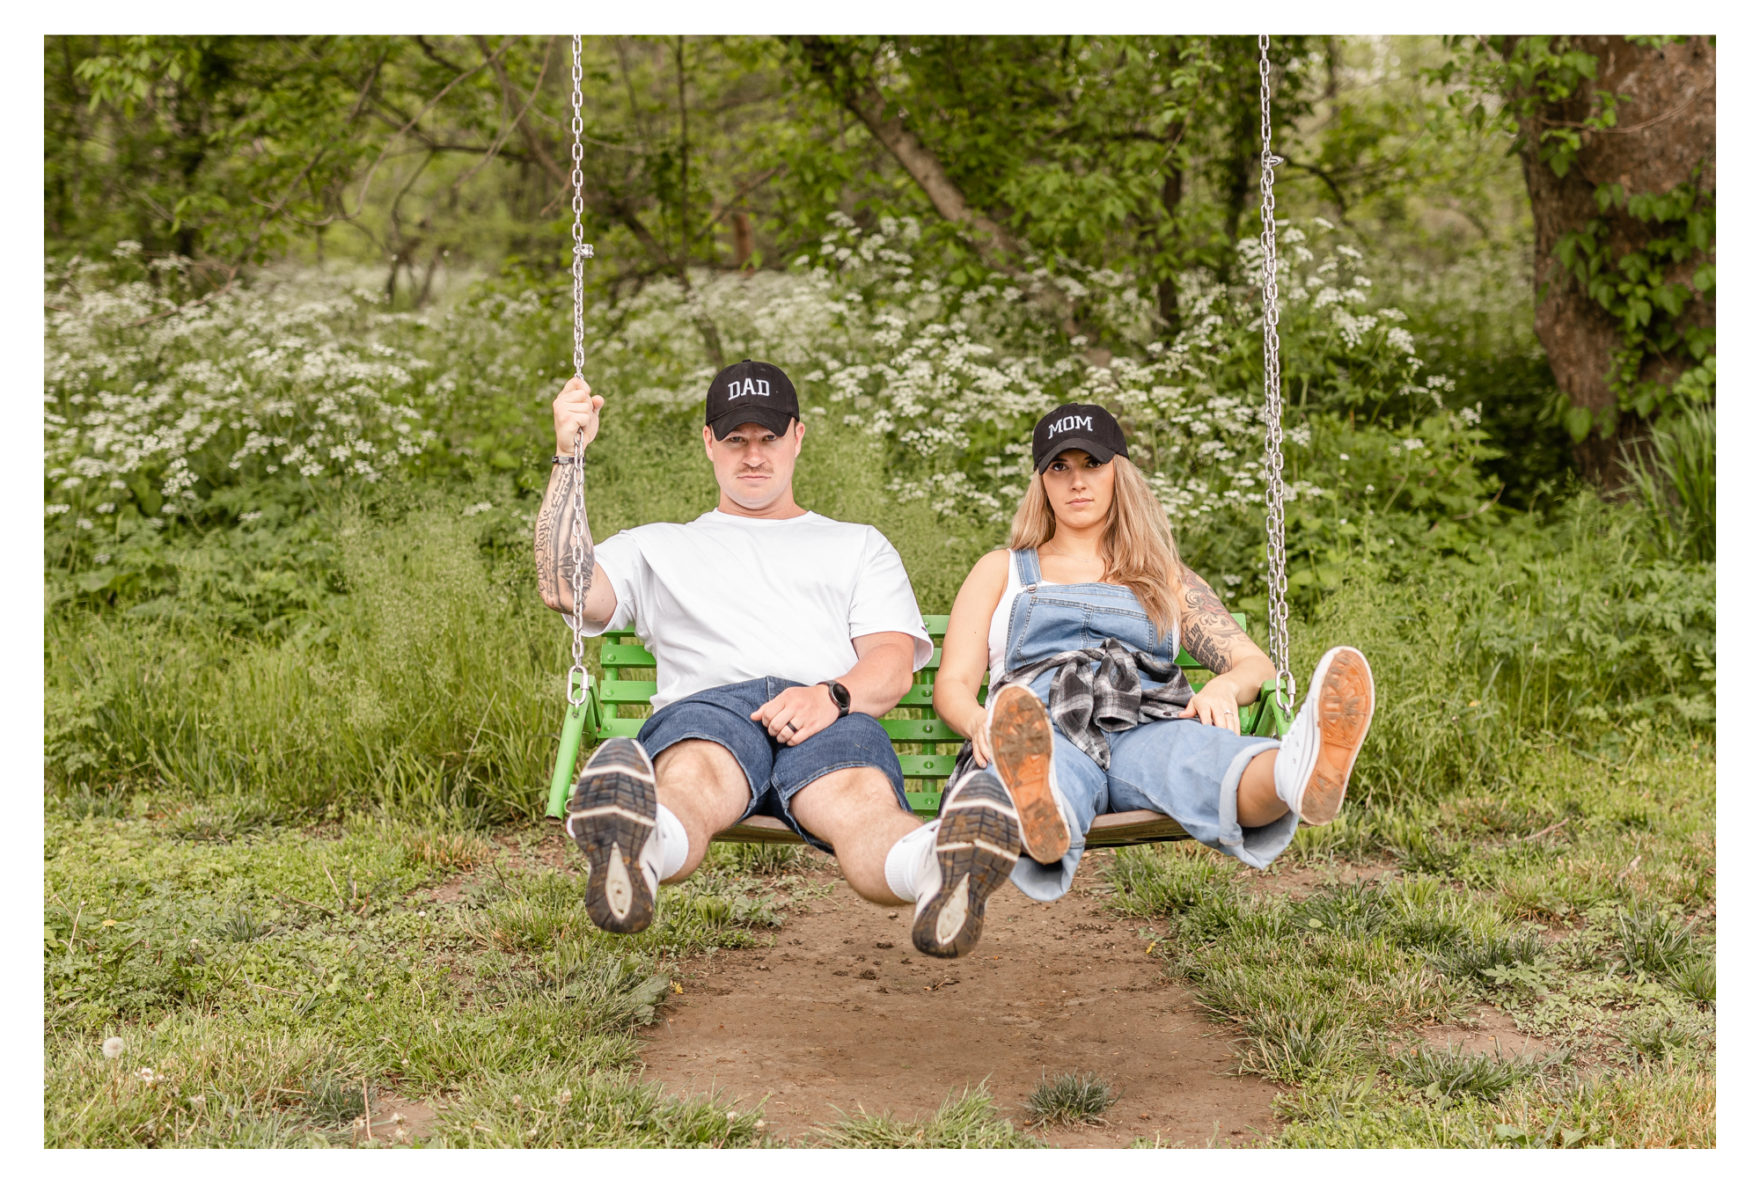 90's theme. 90's photo session. 90's awkward photos. 90's couple photos. 90's couple portraits. 90's couple glamour shots. 90's pregnancy announcement. new pair of genes. Jean overalls. Jorts. Dad Jeans. Mom Jeans. New balances. Awkward Couple Poses. Awkward portrait session.